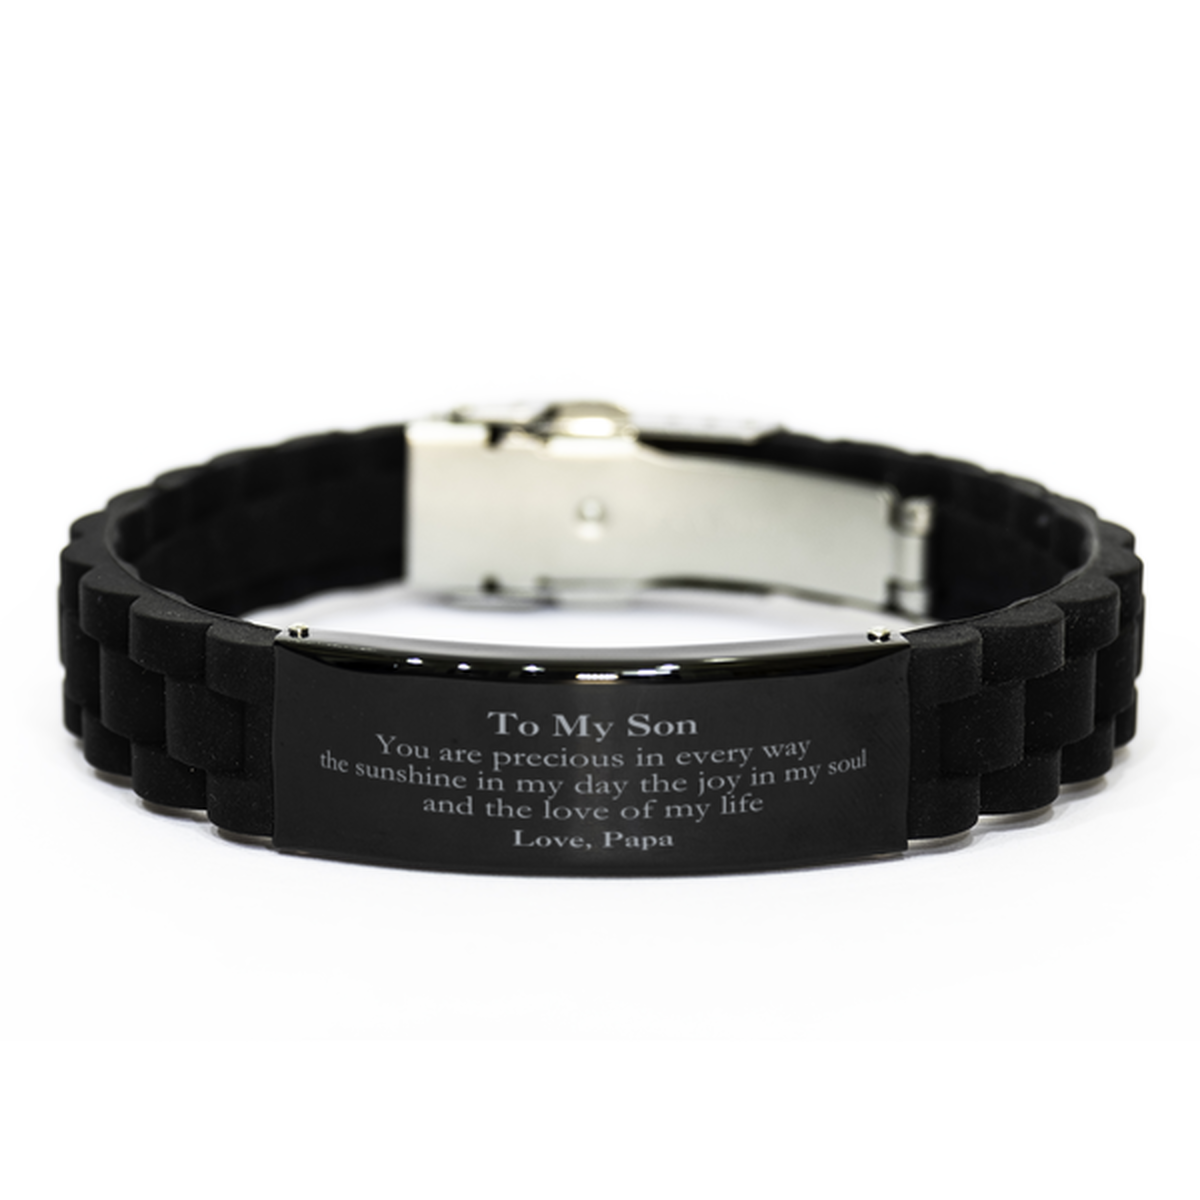 Graduation Gifts for Son Black Glidelock Clasp Bracelet Present from Papa, Christmas Son Birthday Gifts Son You are precious in every way the sunshine in my day. Love, Papa